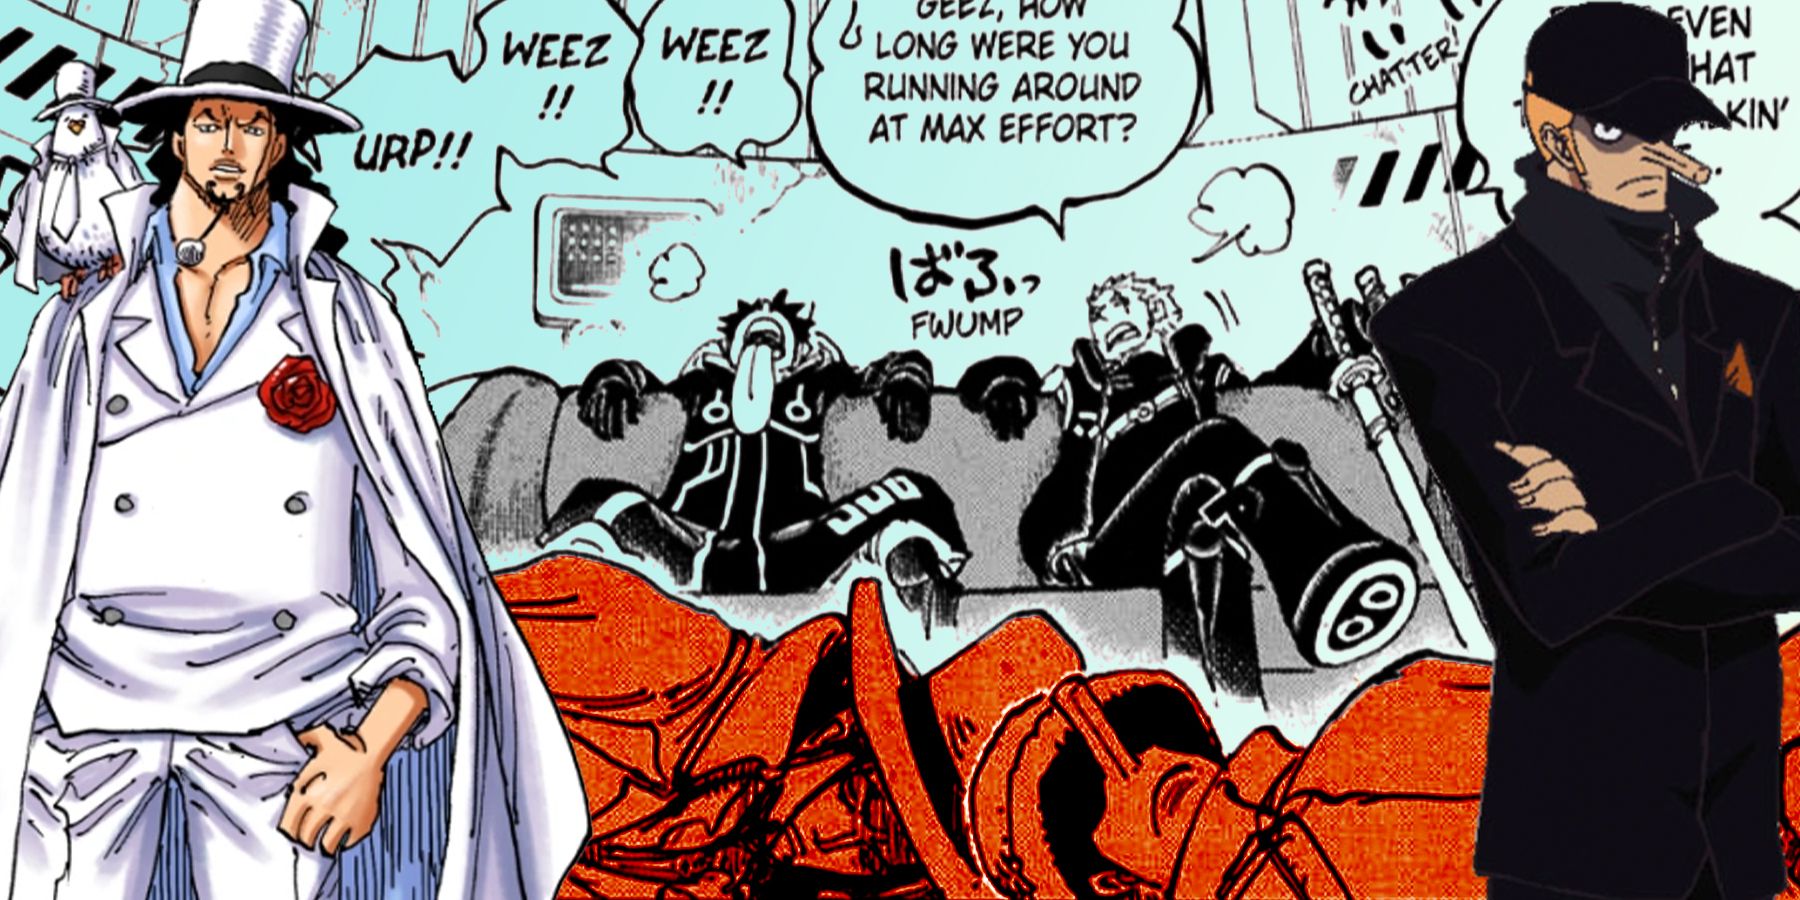 One Piece Theory: Lucci and Kaku Aren’t Really Out Cold